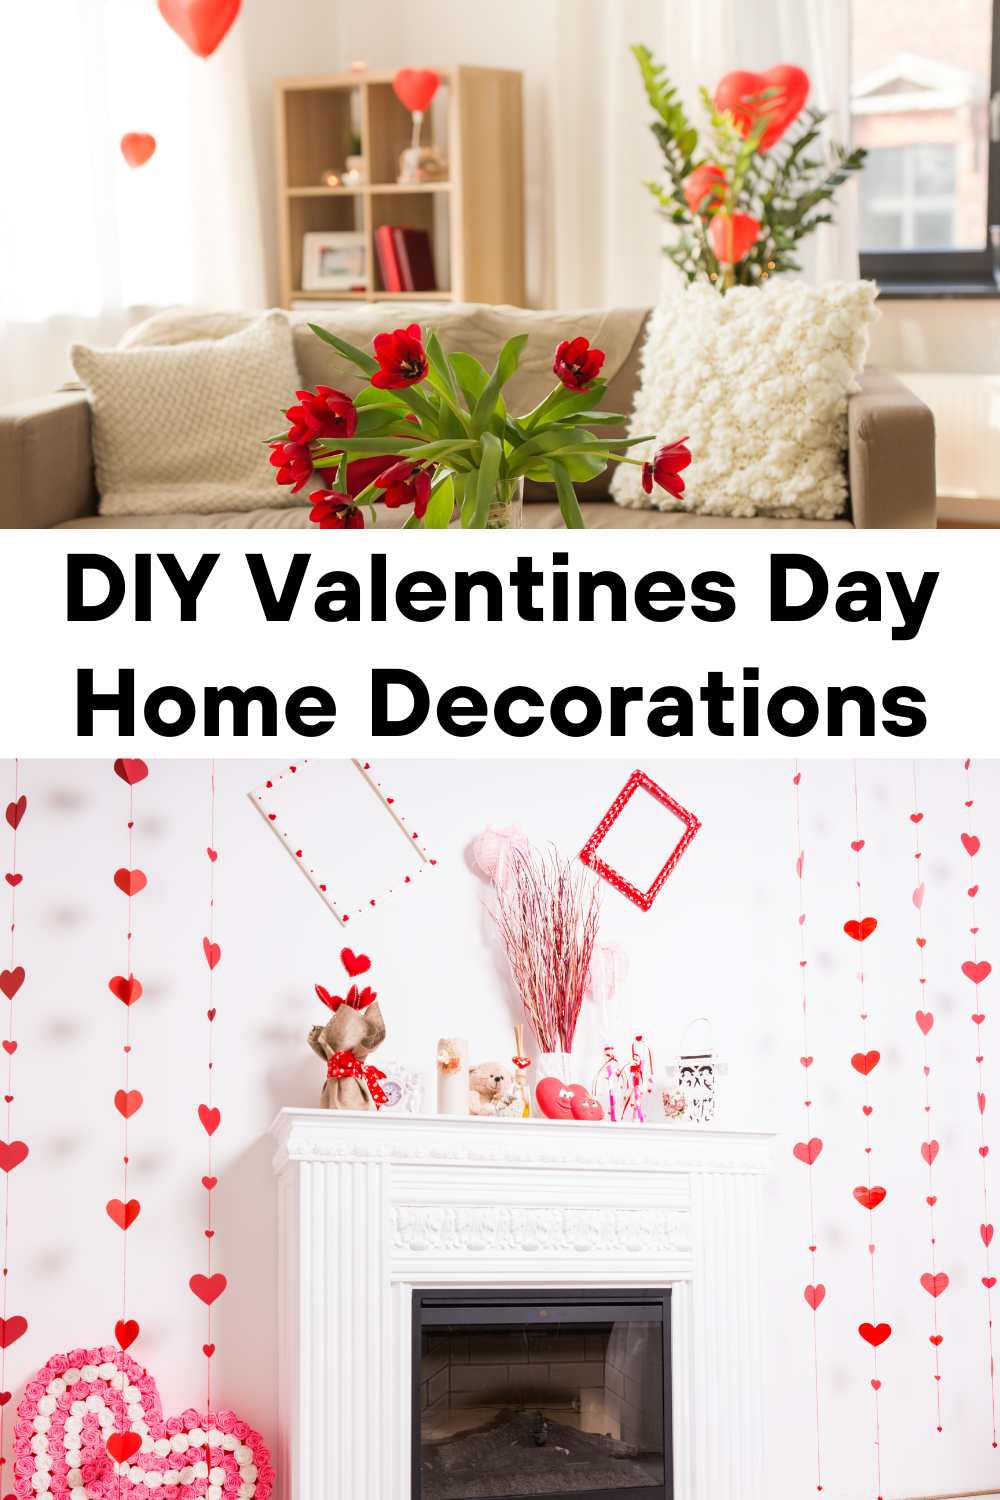 13 PRETTIEST AESTHETIC VALENTINE'S DAY DECORATED HEART-SHAPED